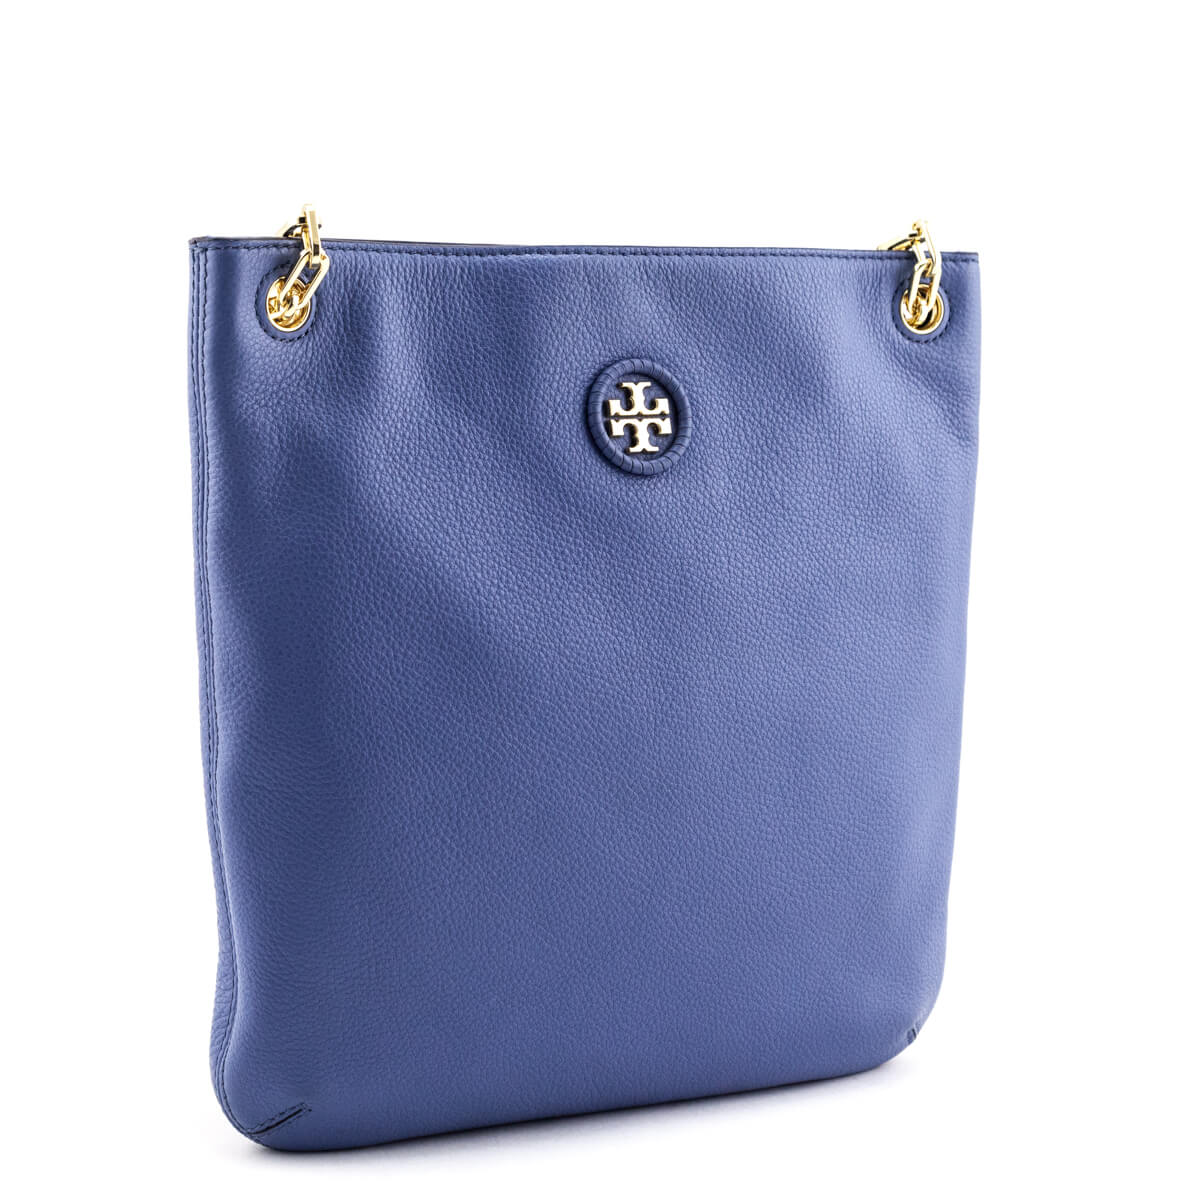 Tory Burch Blue Leather Chain Bucket Bag - Preloved Tory Burch Bags CA